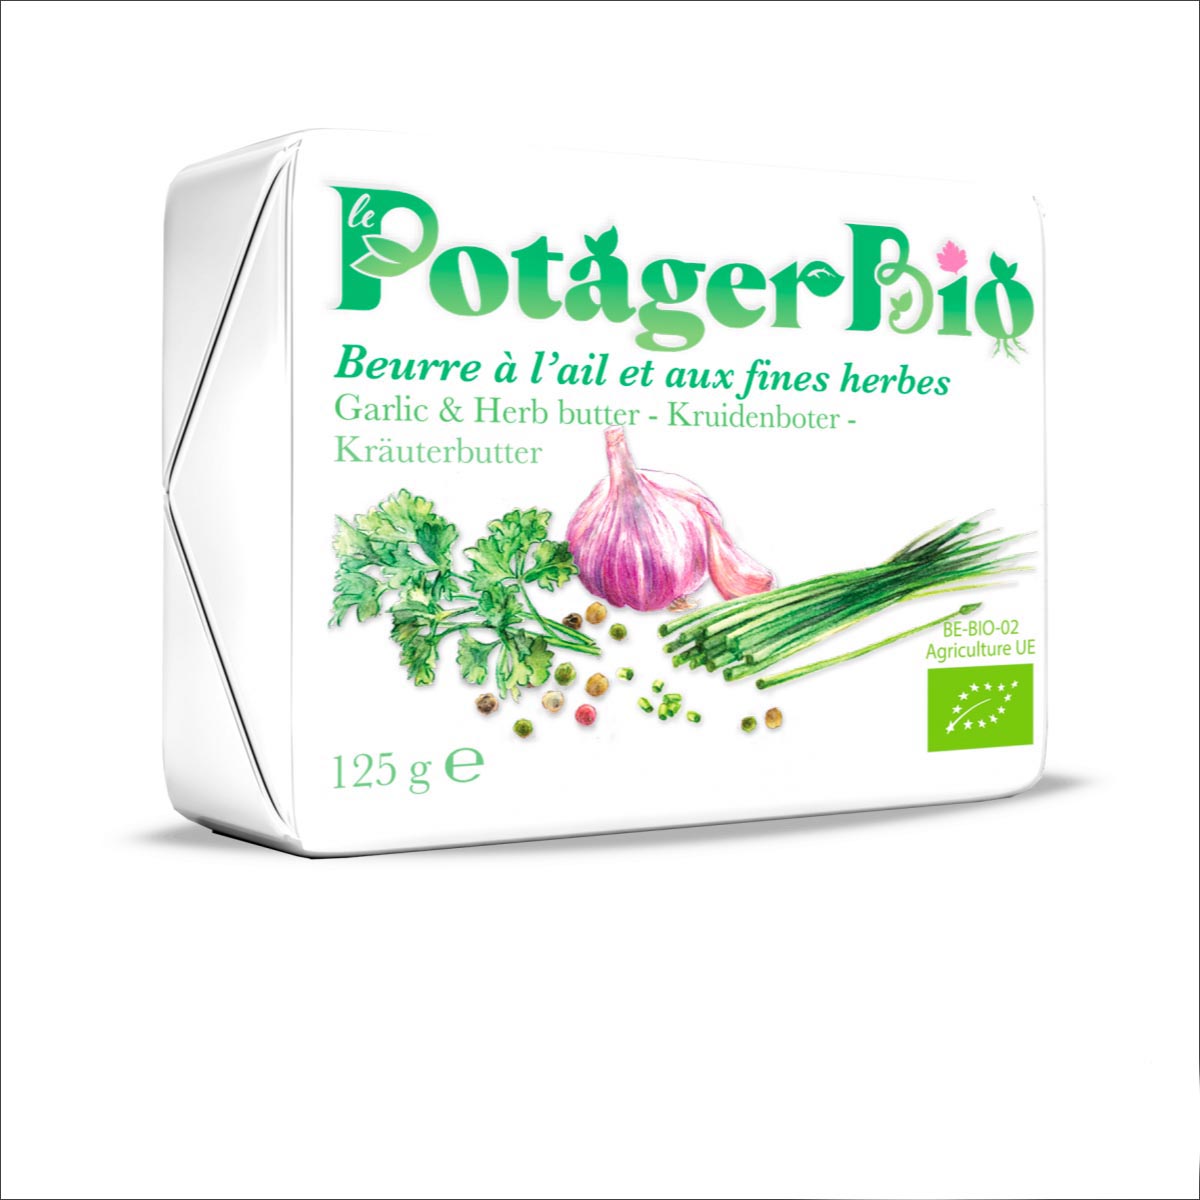 Le Potager Bio Logo and Packaging